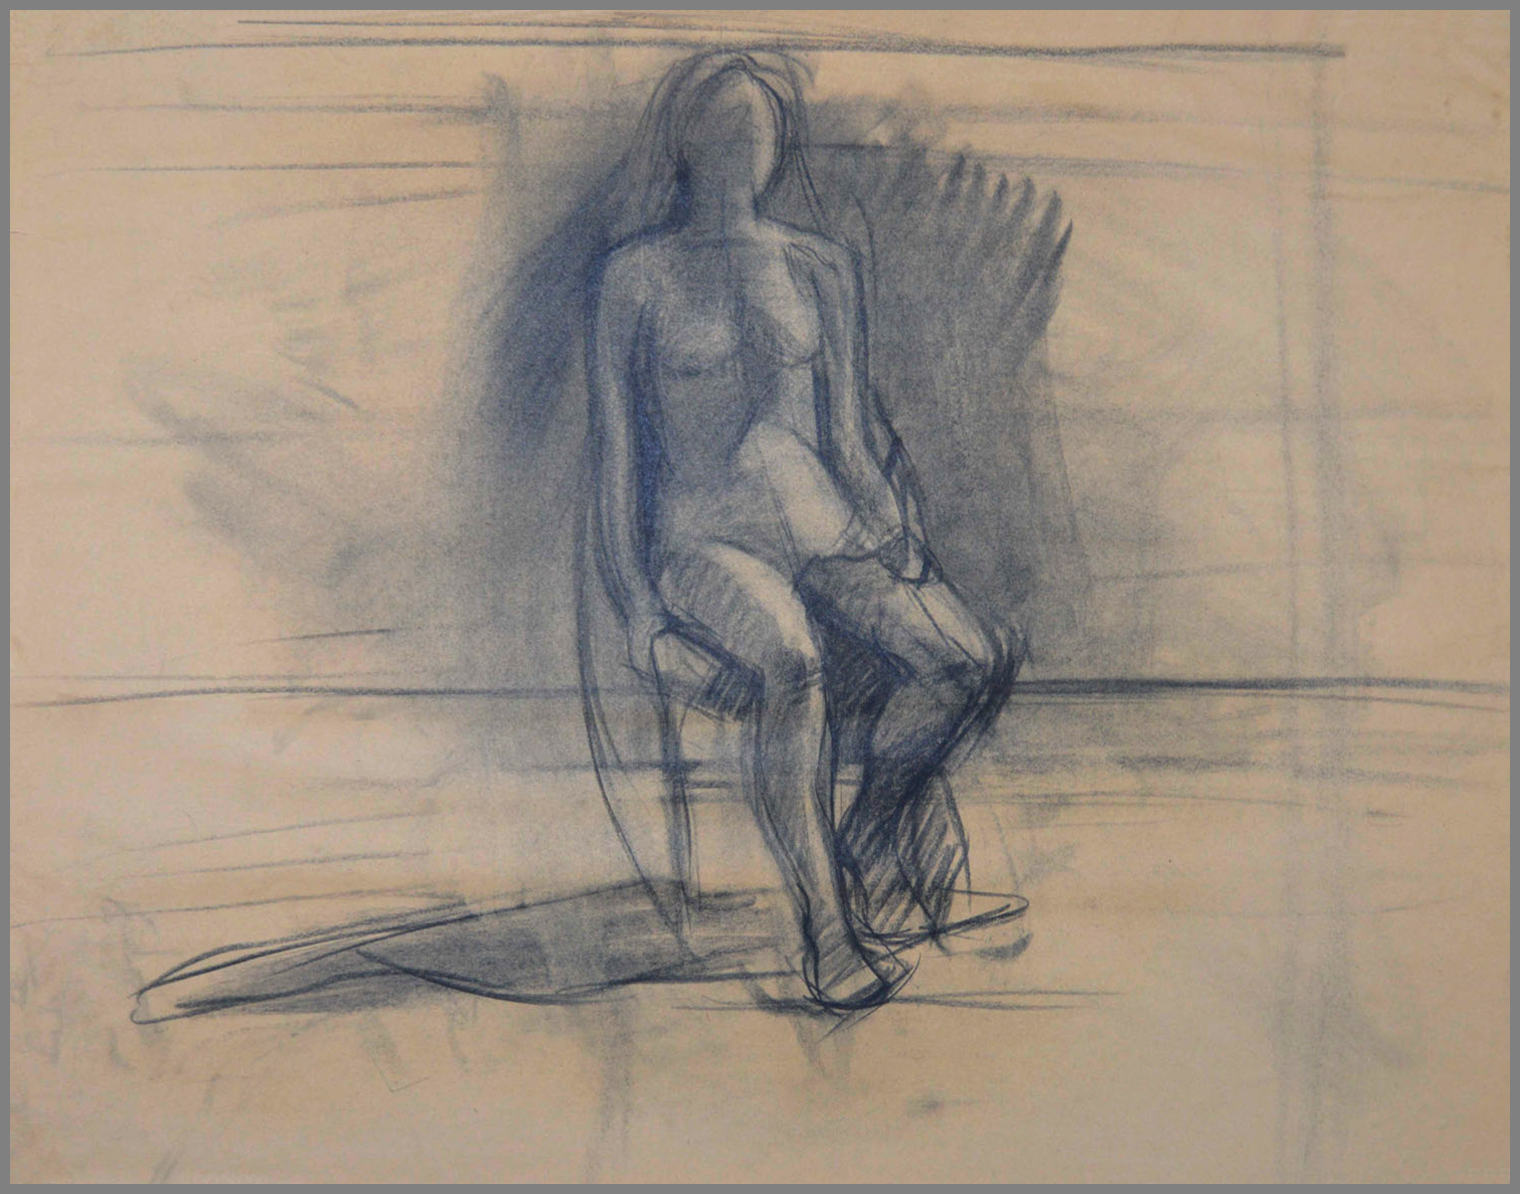  Outdoor Nude, charcoal, 18 x 24 inches 